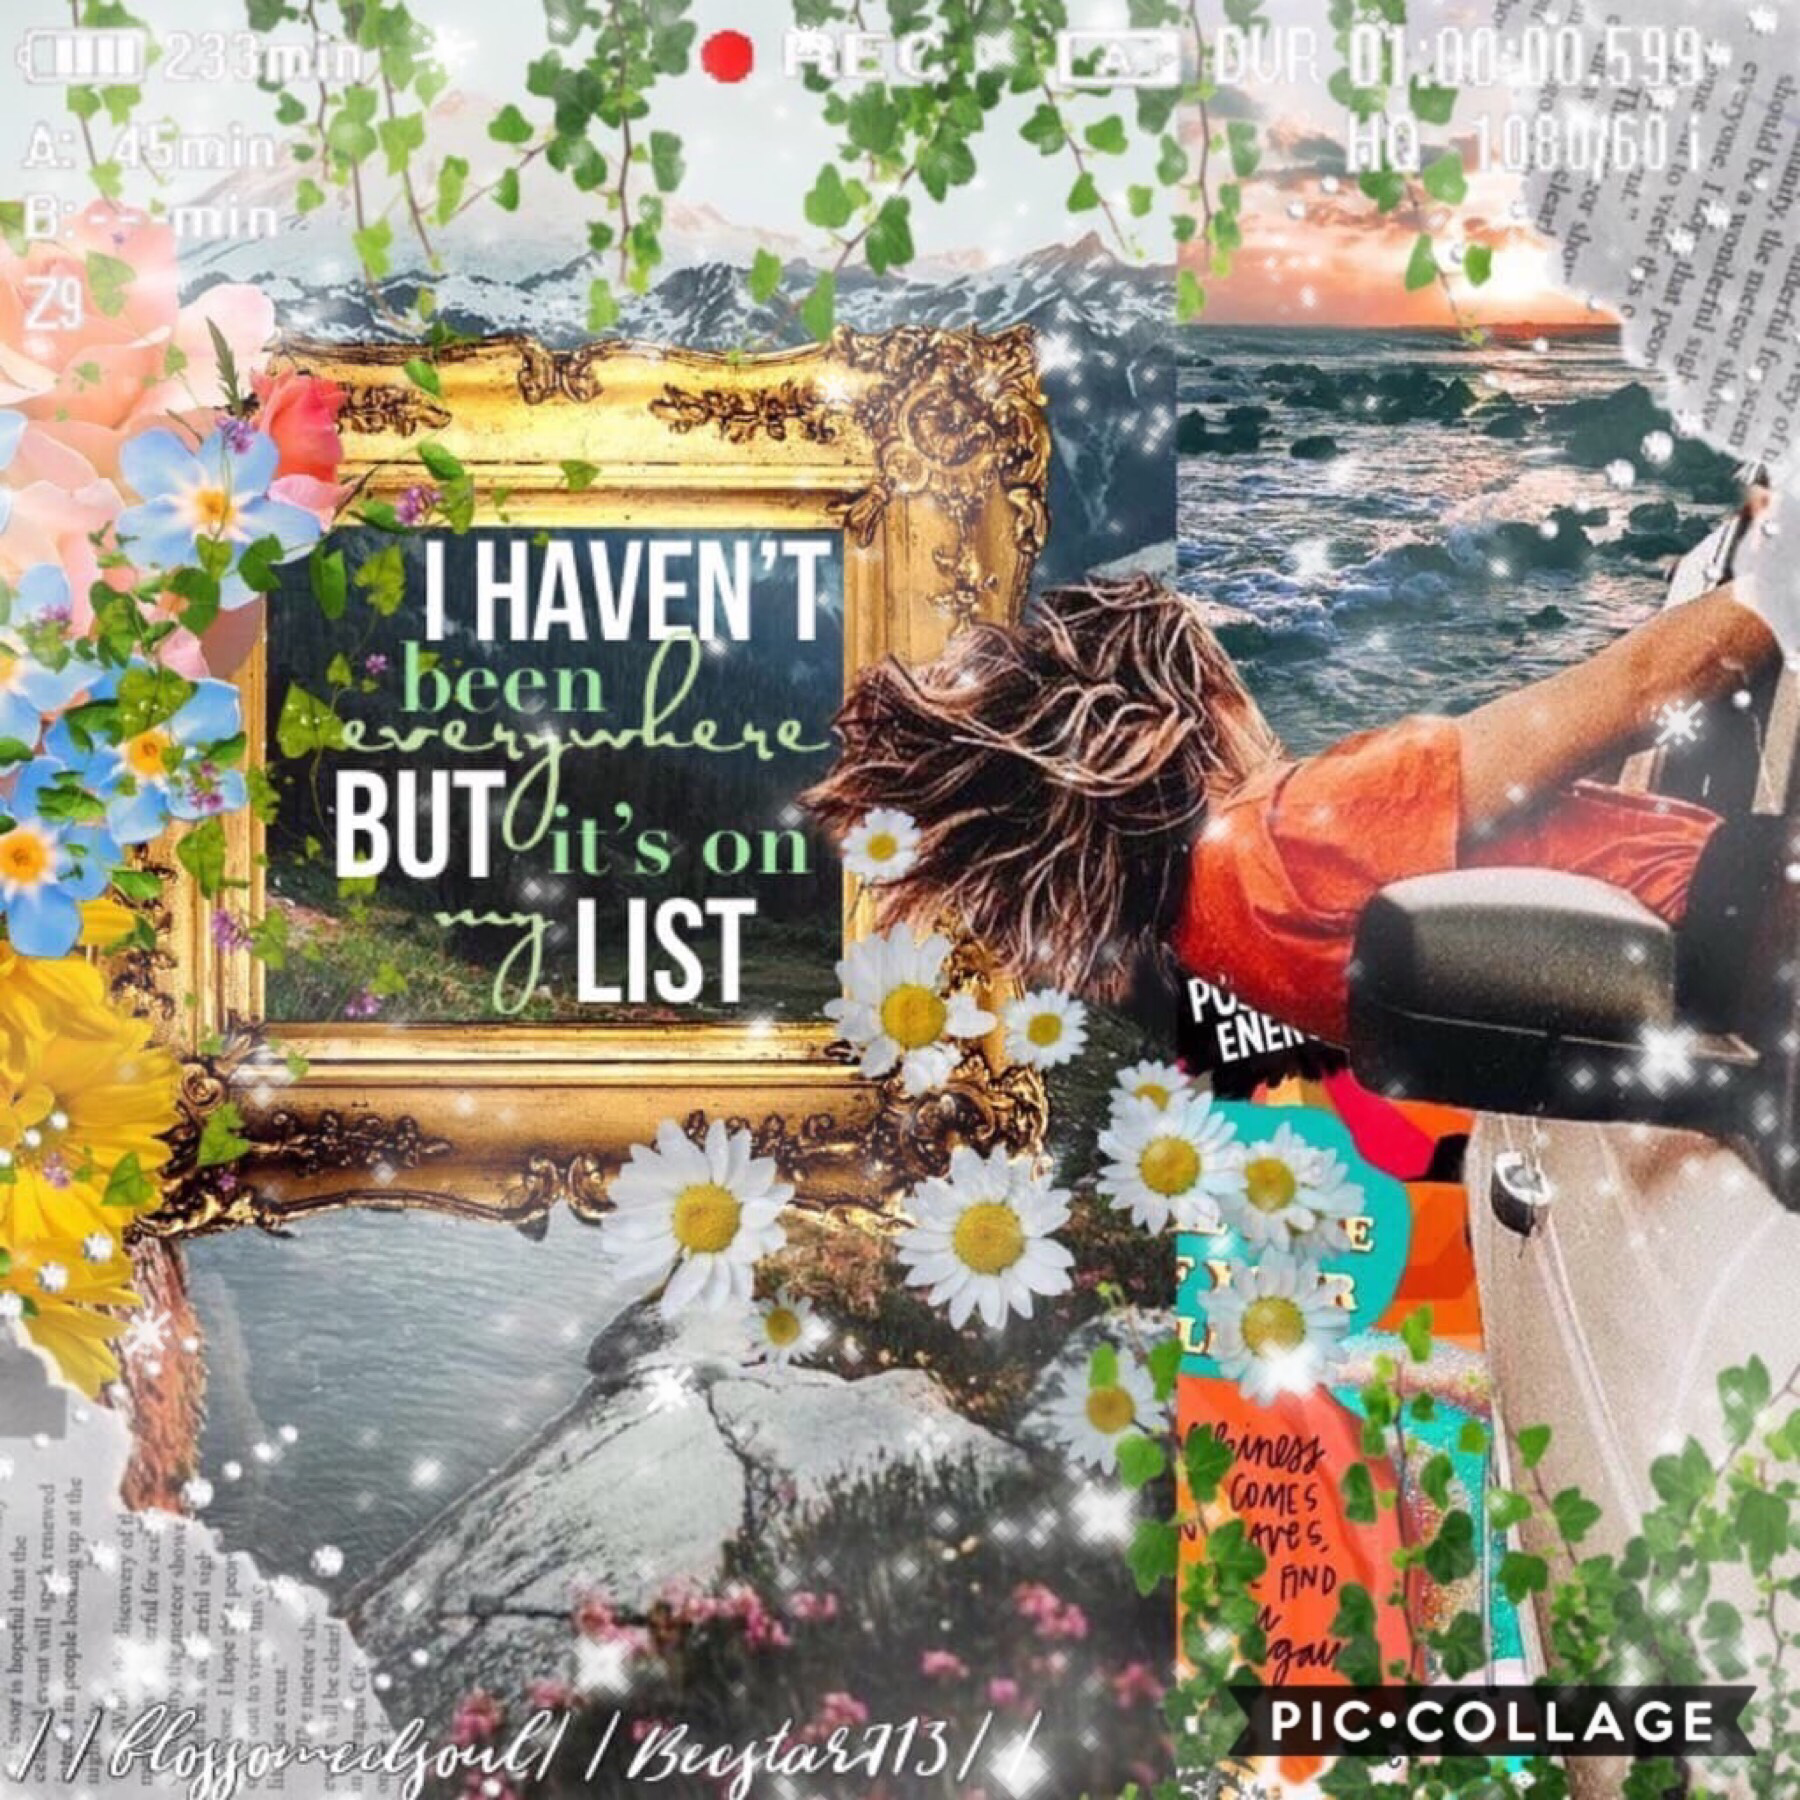 • t a p •

collab with @Becstar713! go follow her rn if you haven’t already, she’s super sweet and an amazing collager 💕☀️ how is everyone? sorry i haven’t posted in a couple days, haven’t found time to make collages 🌿🦋